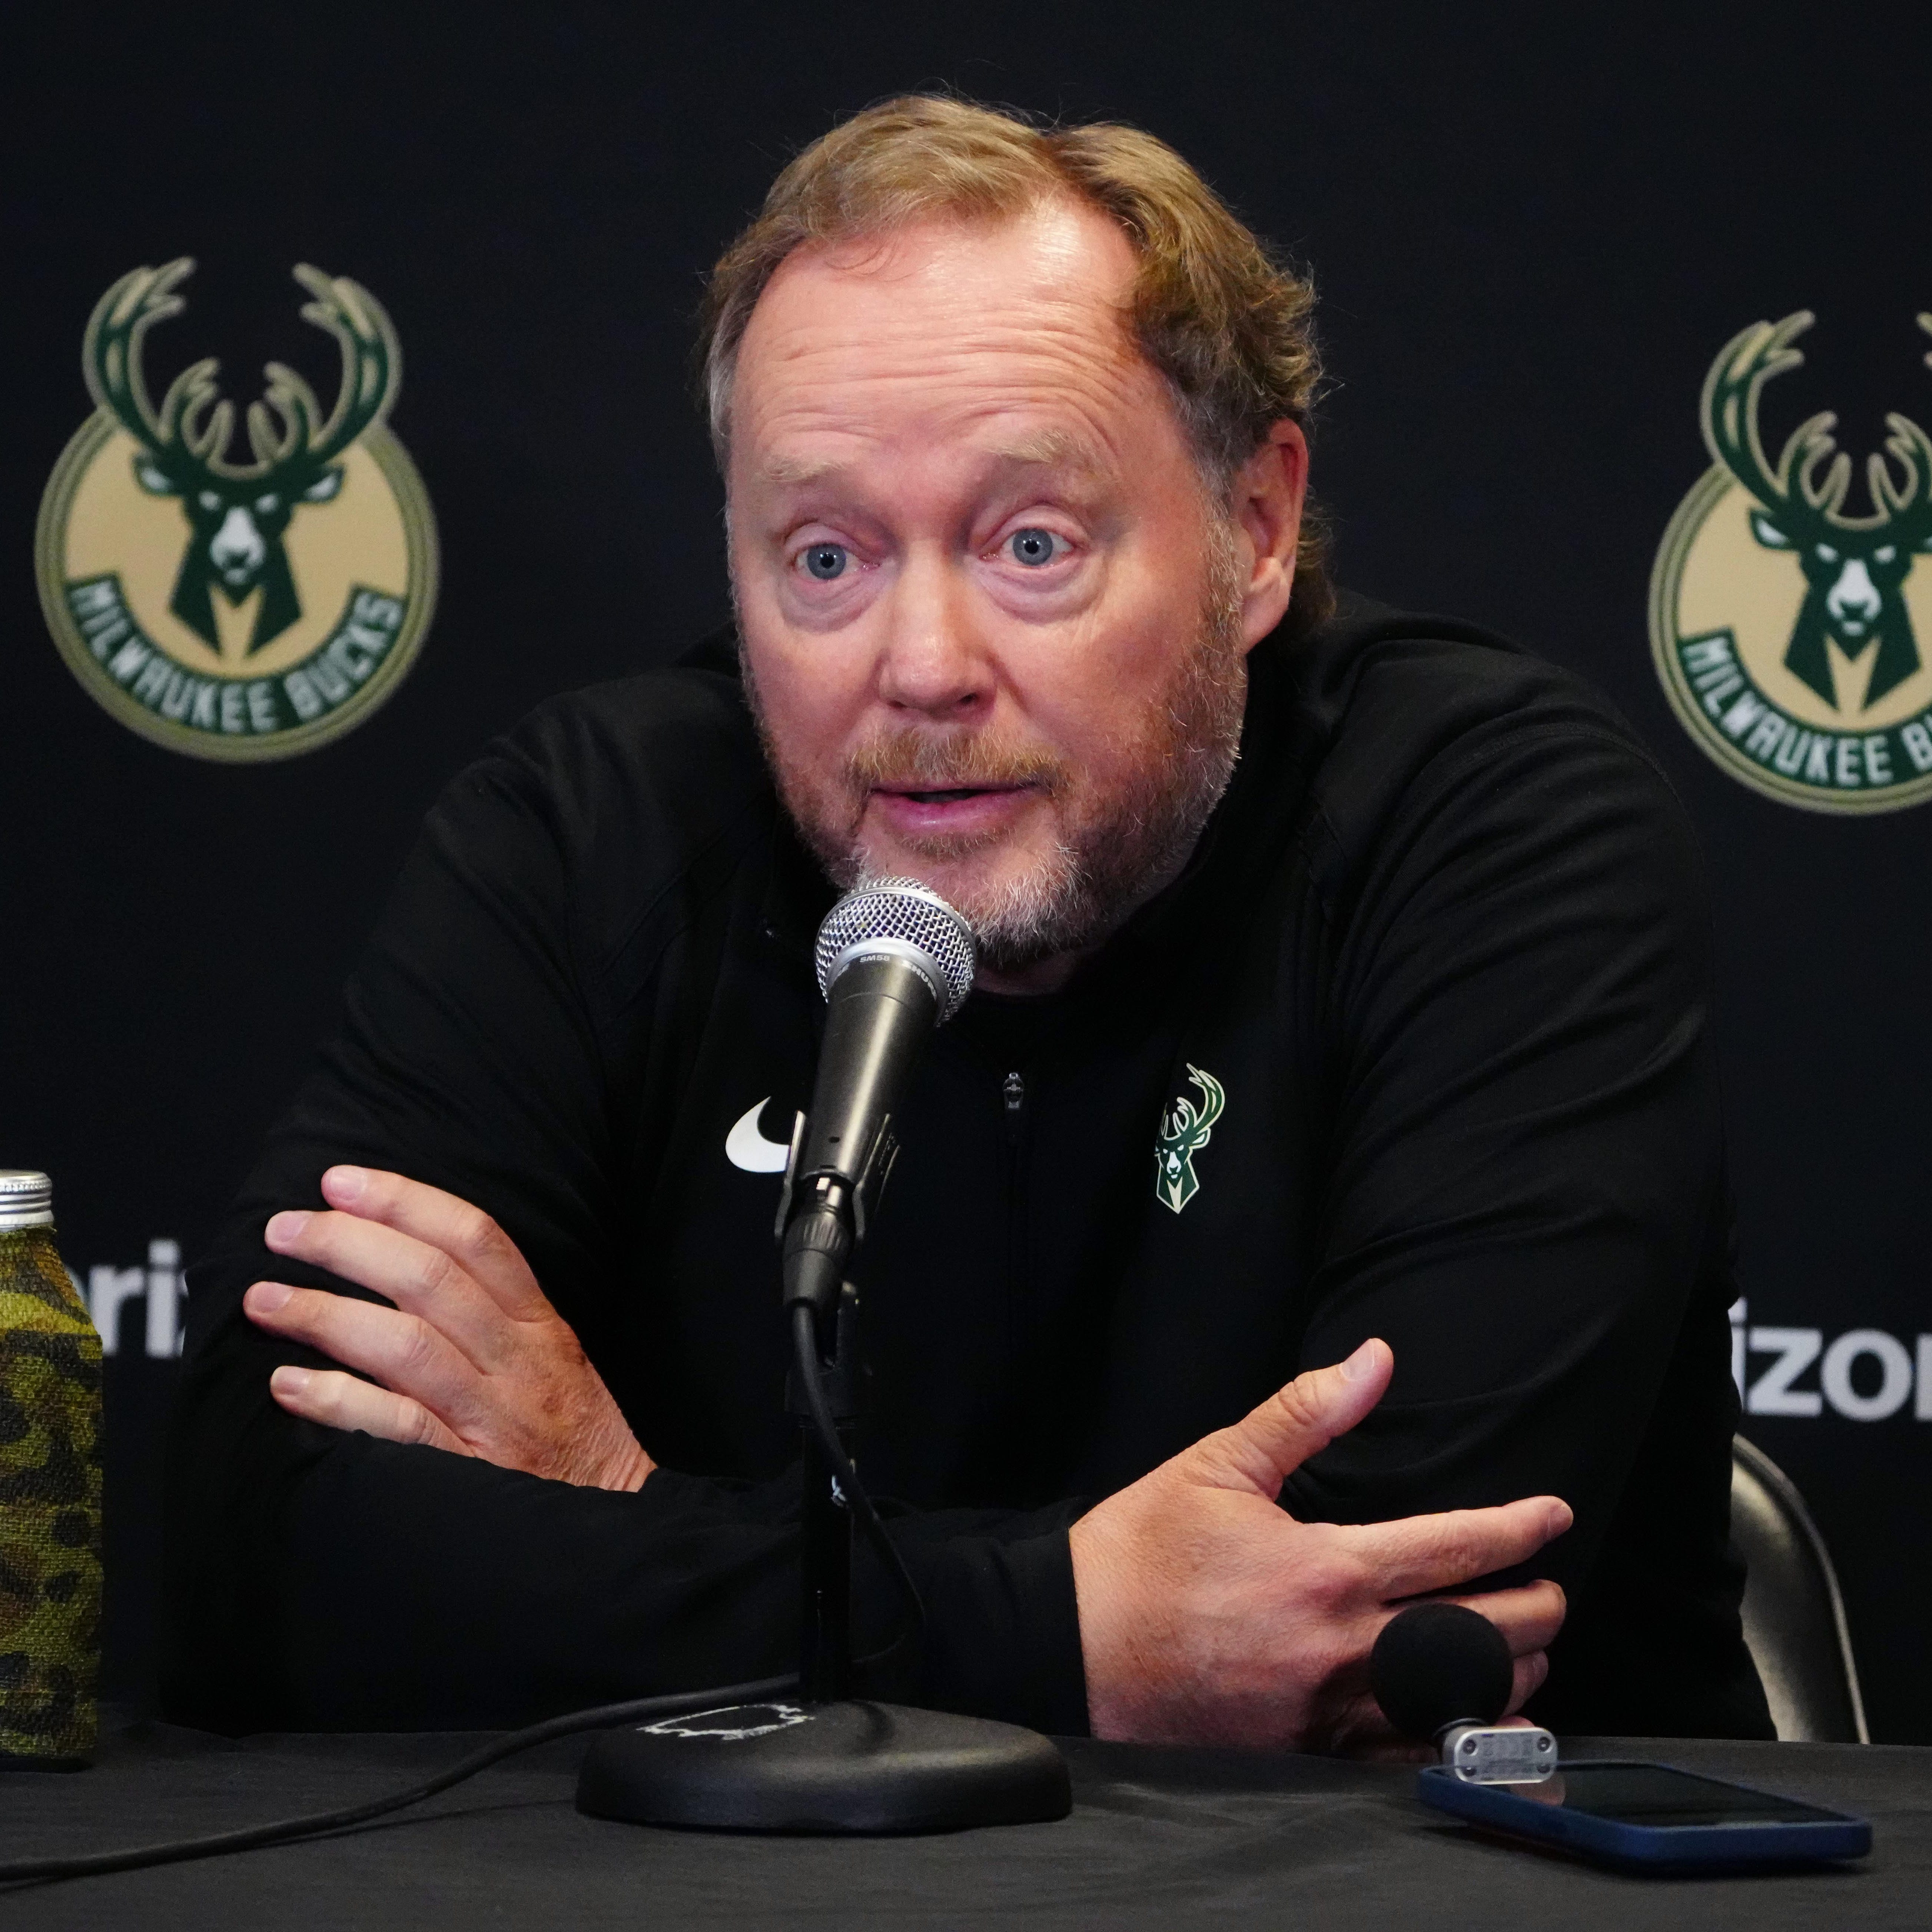 One of Mike Budenholzer's brothers died in a car accident during the Bucks' first-round series against the Heat.